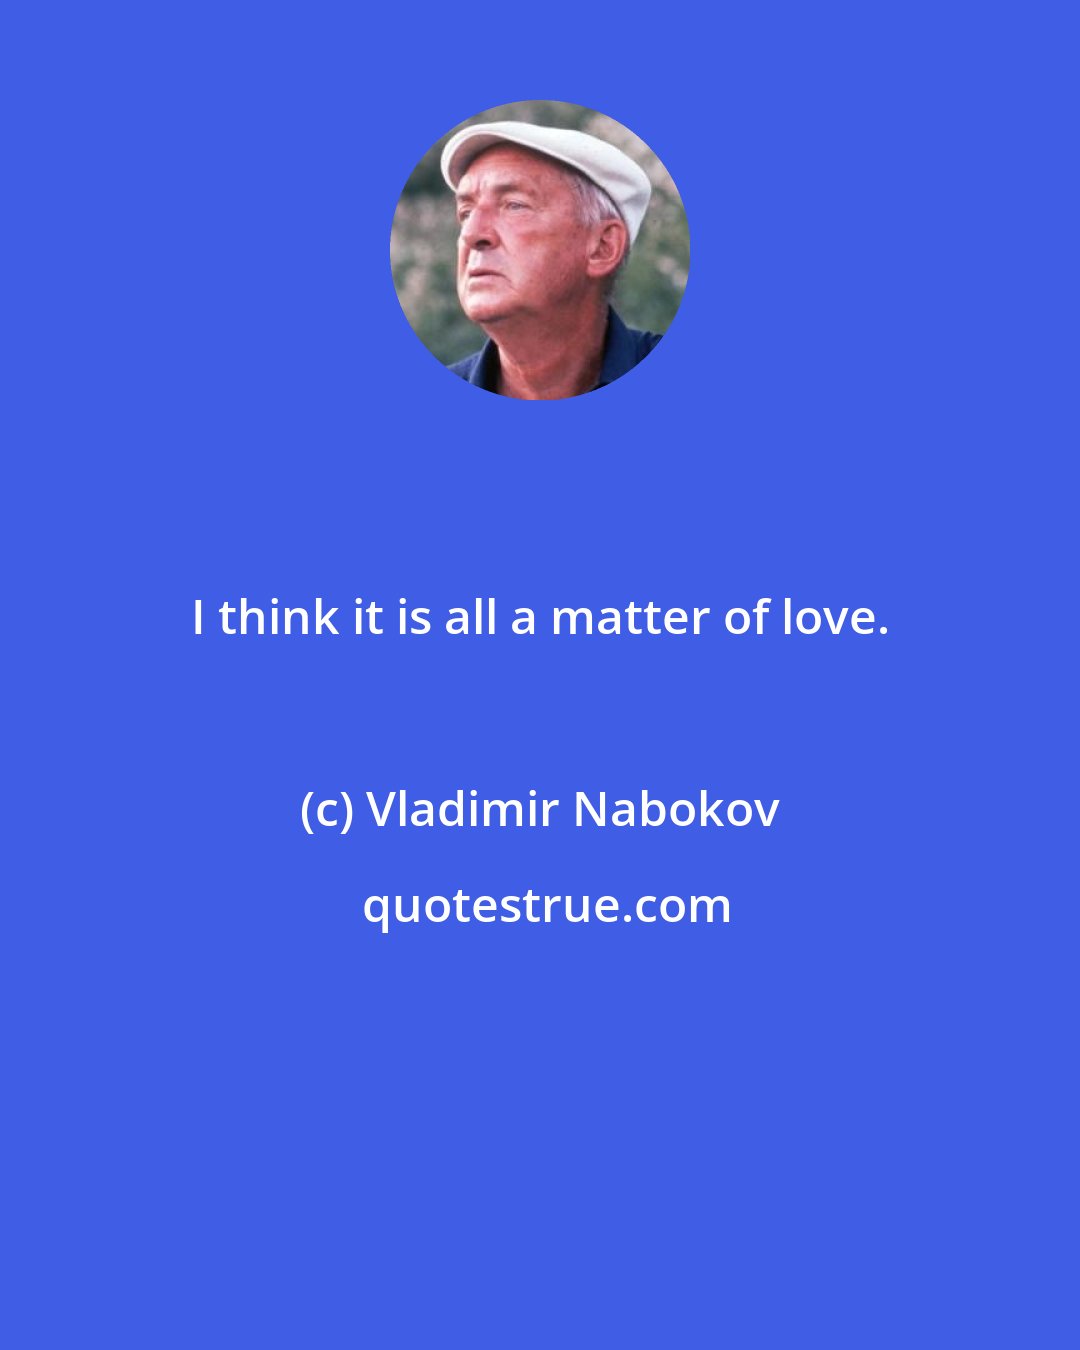 Vladimir Nabokov: I think it is all a matter of love.